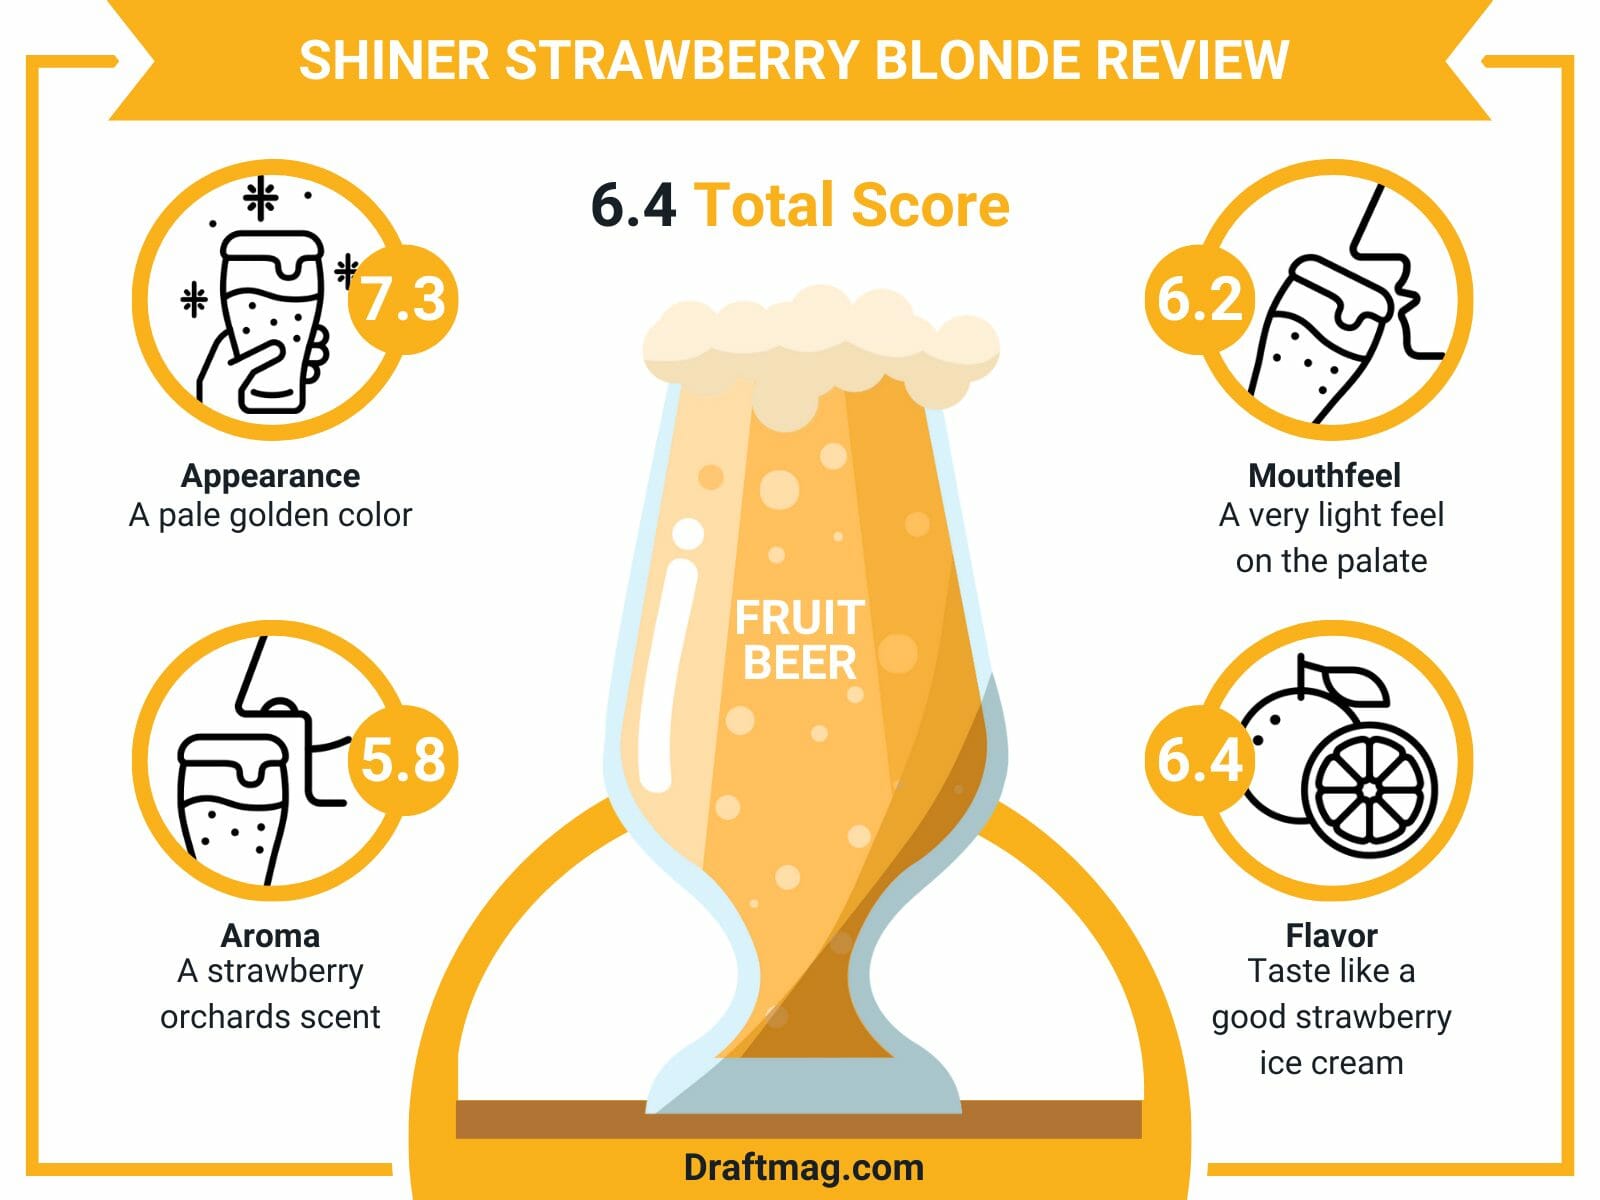 Shiner Strawberry Blonde Review Infographic